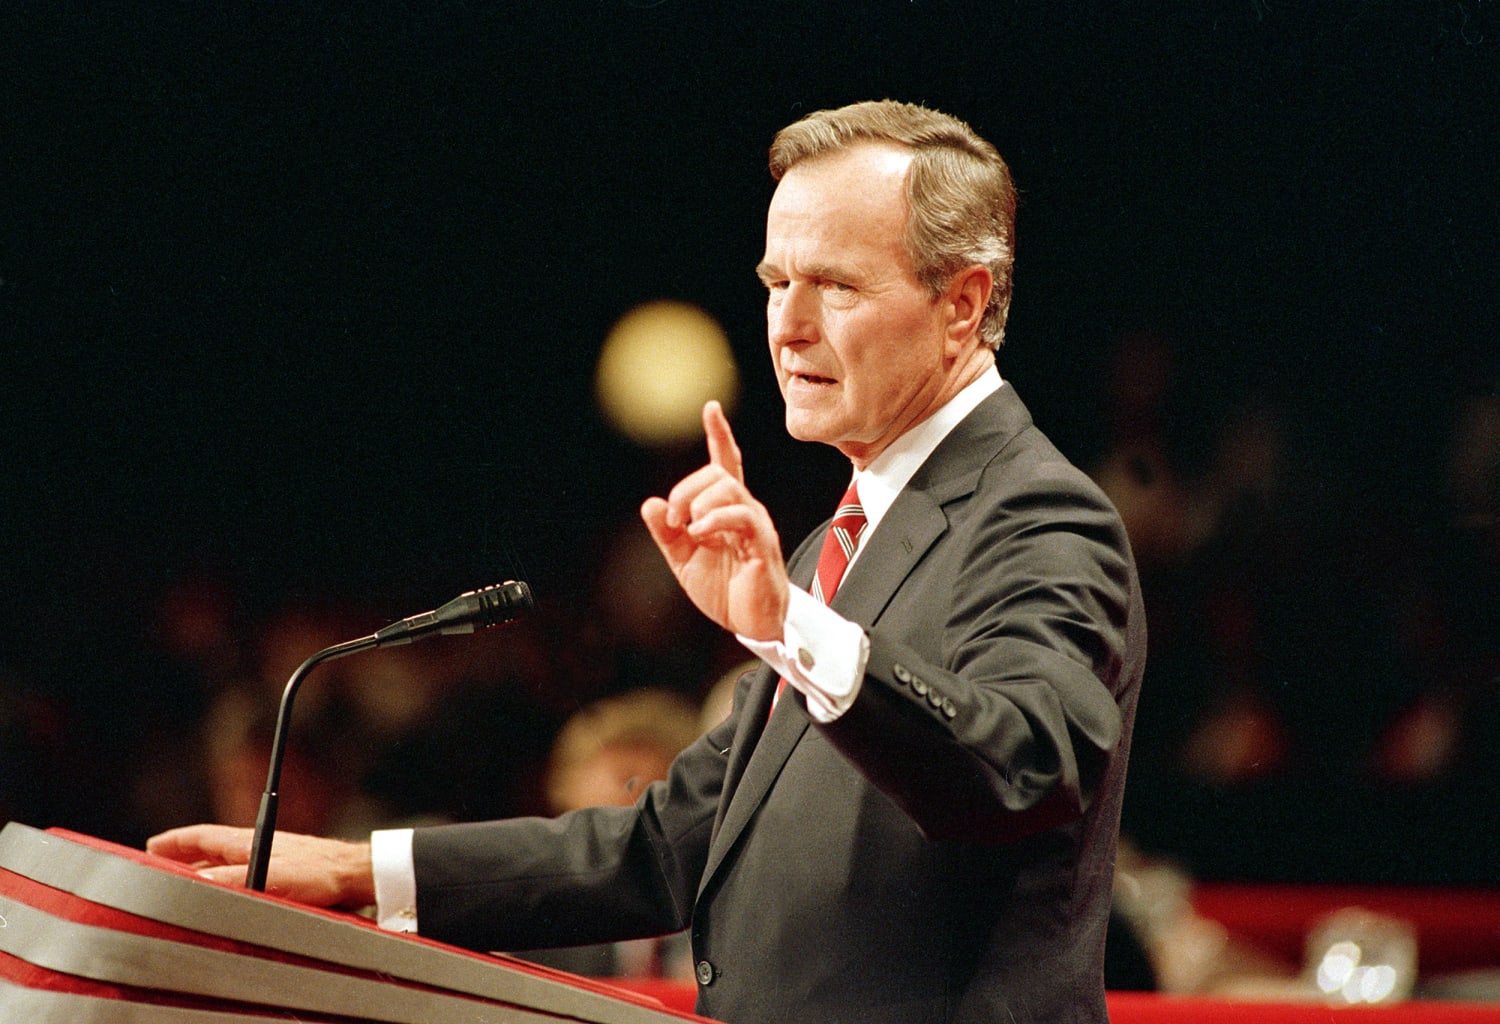 These Six Words Changed George H.W. Bush'S Presidency